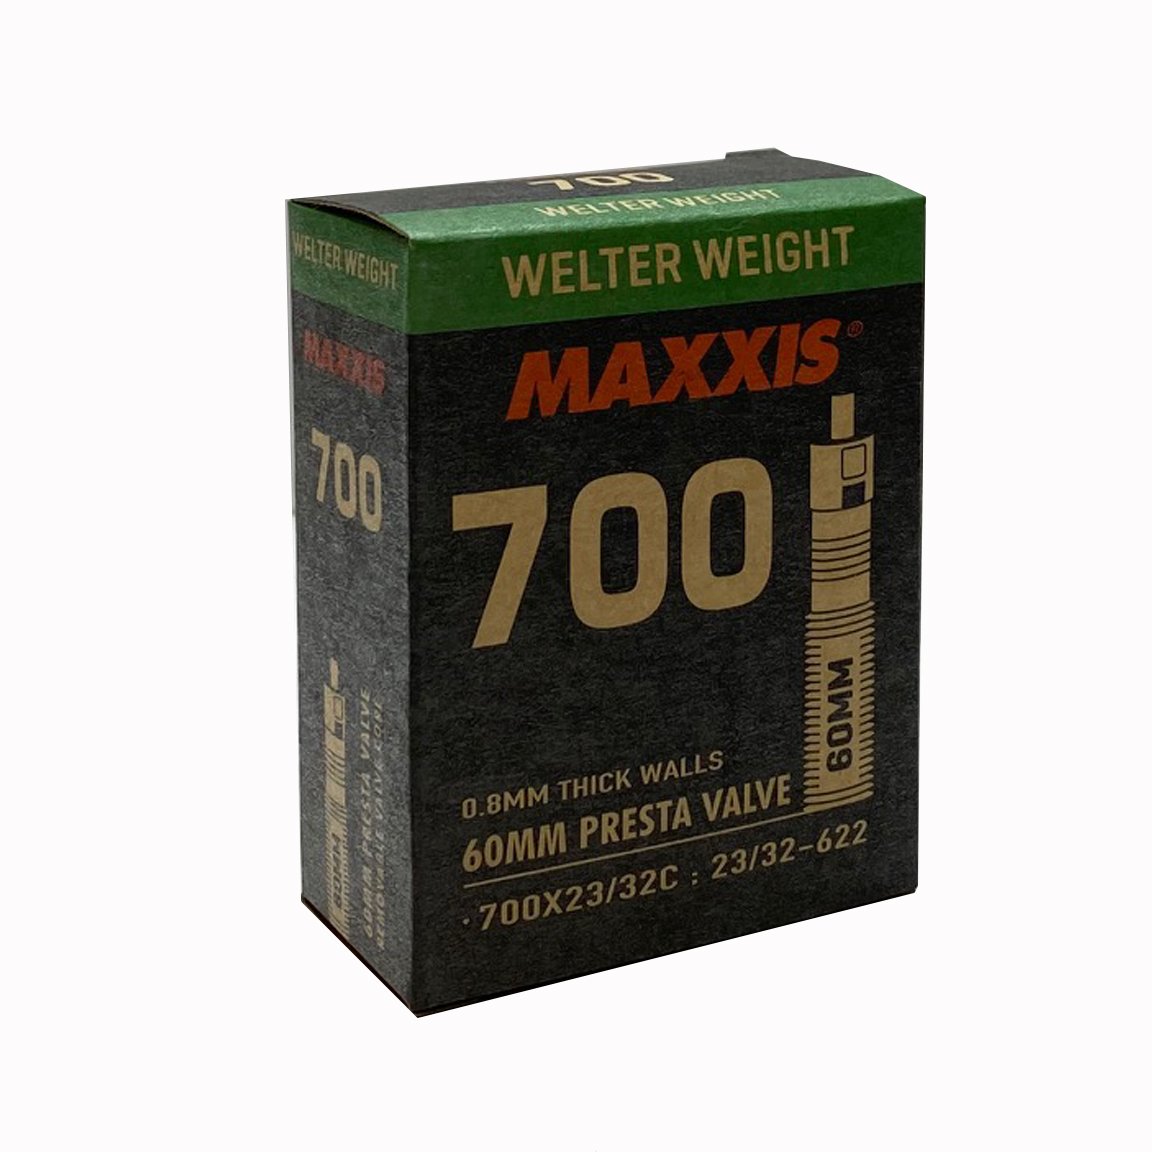 Камера 700x23/32C Maxxis Welter Weight 60 FV